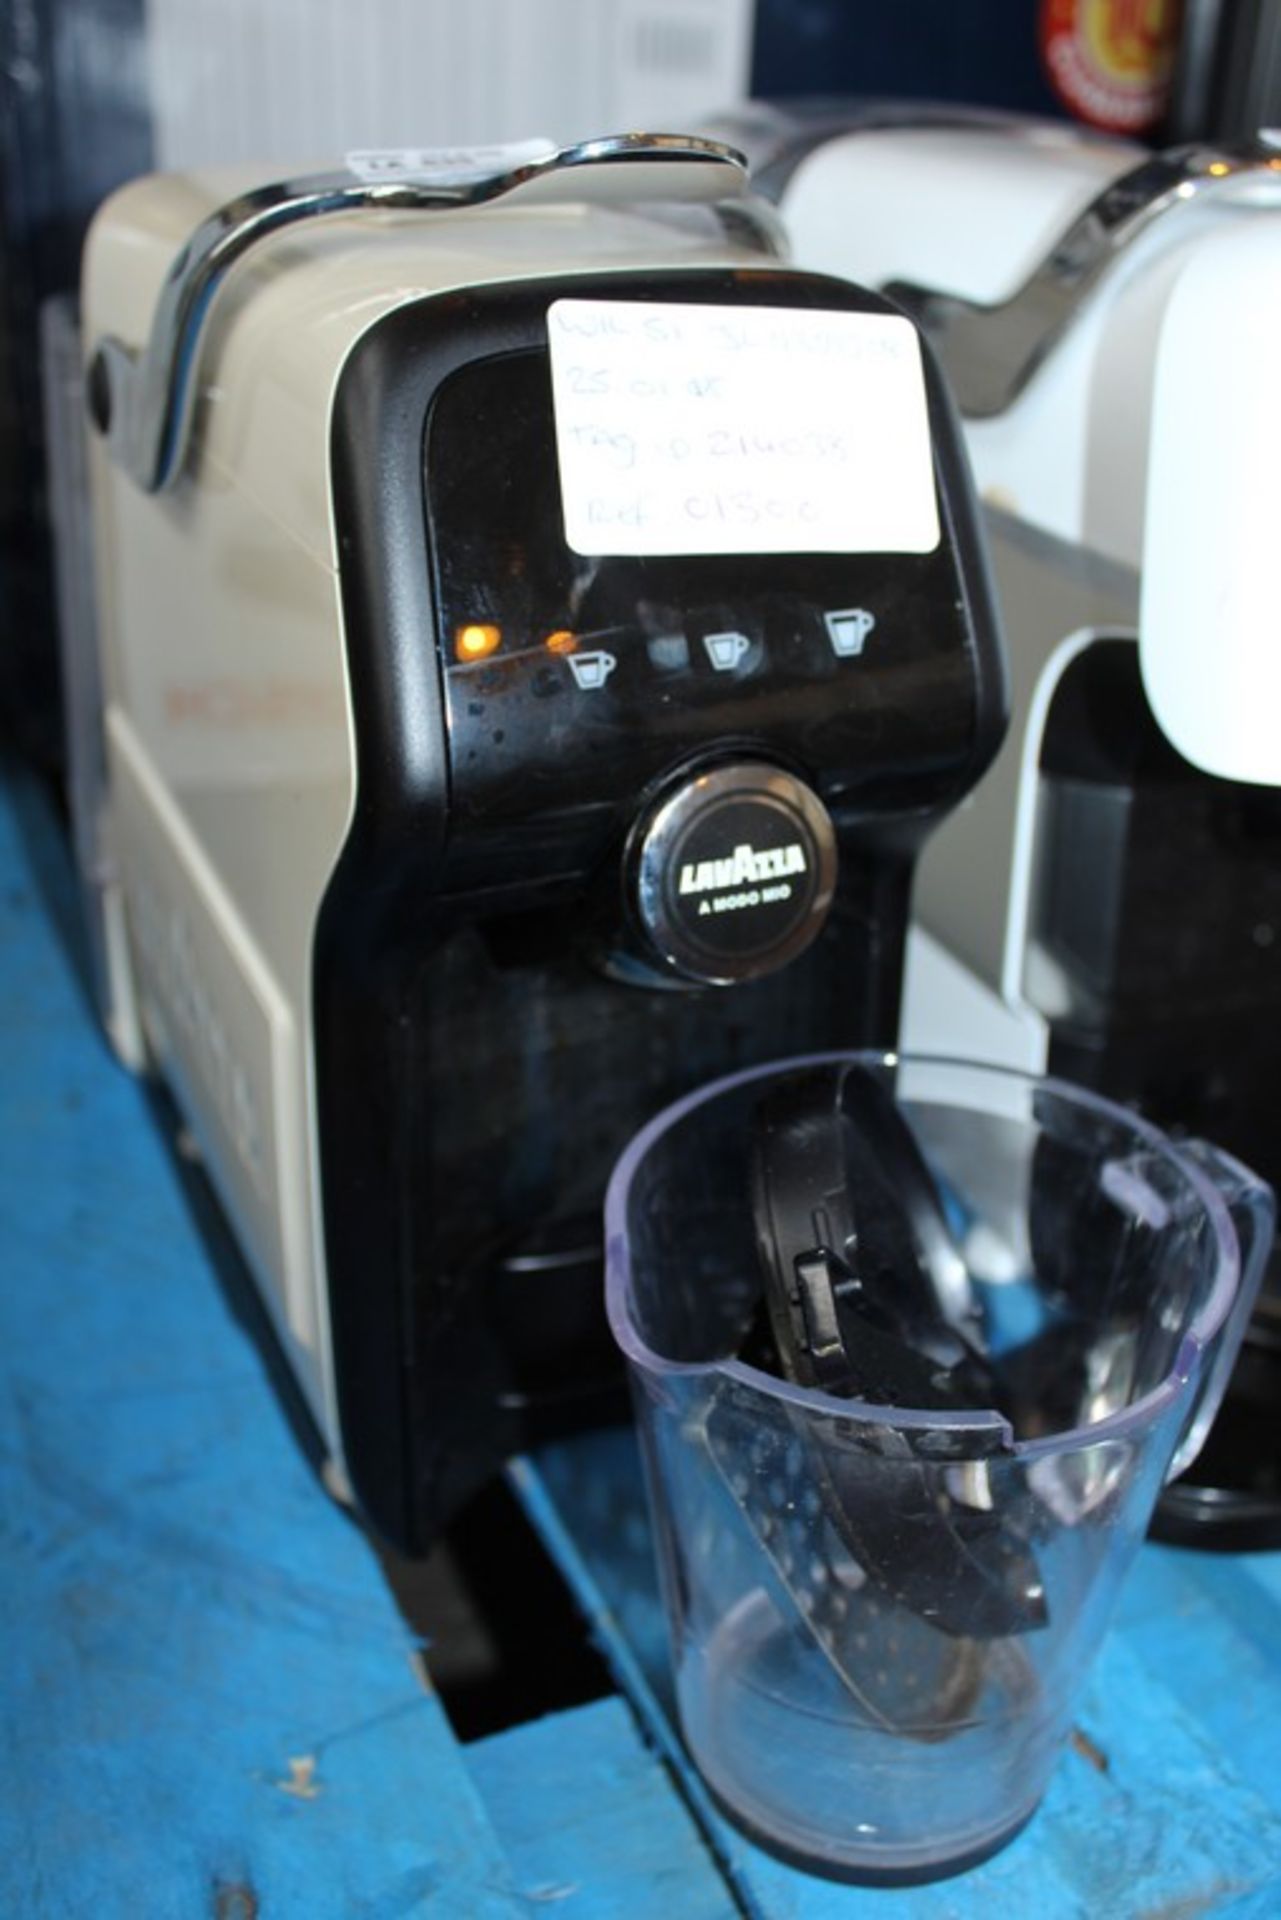 1 x AEG COFFEE MACHINE IN CREAM RRP £130 (25.01.18) *PLEASE NOTE THAT THE BID PRICE IS MULTIPLIED BY